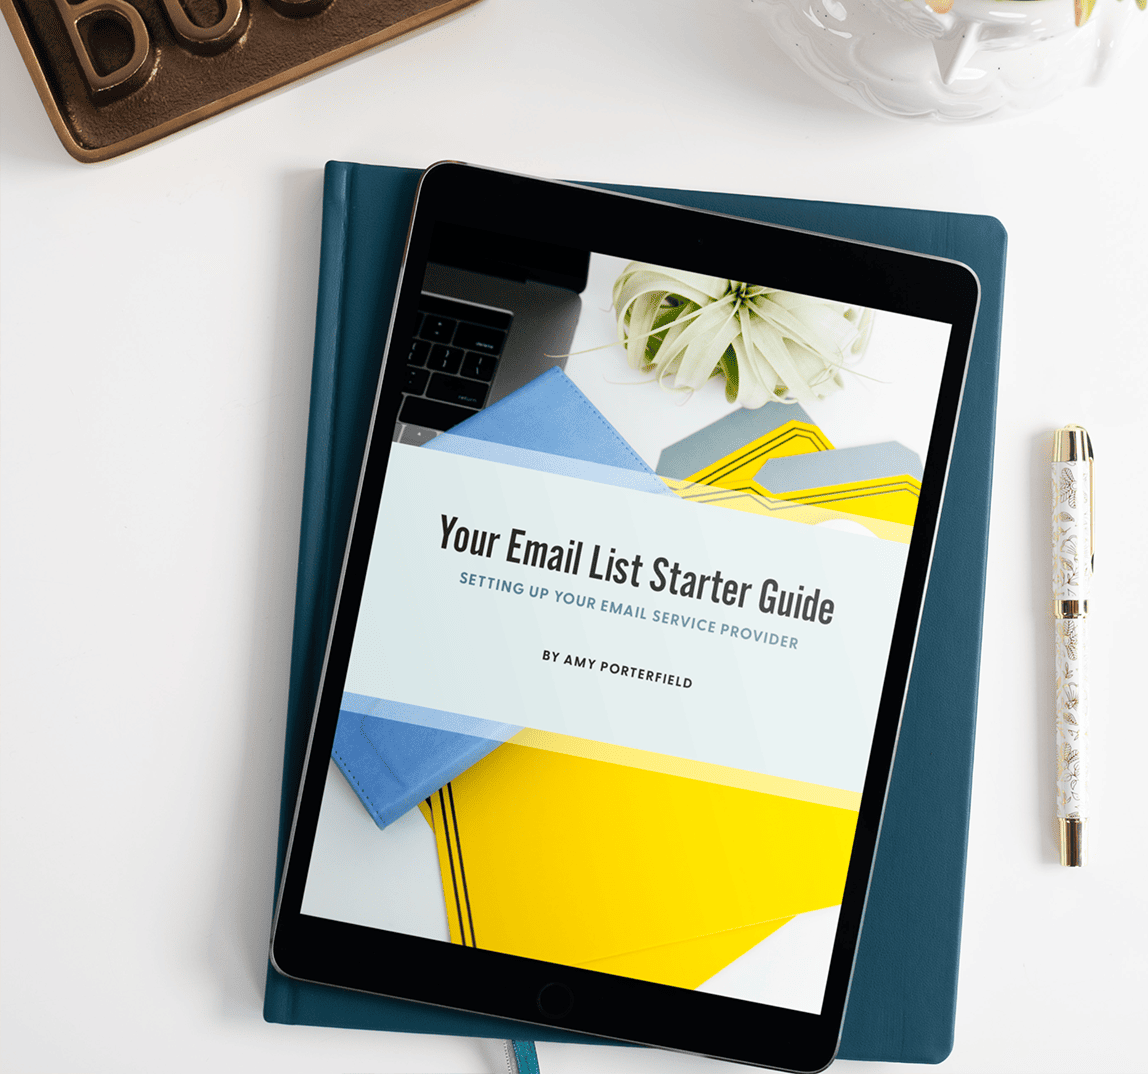 Your email list starter guide mockup on an ipad